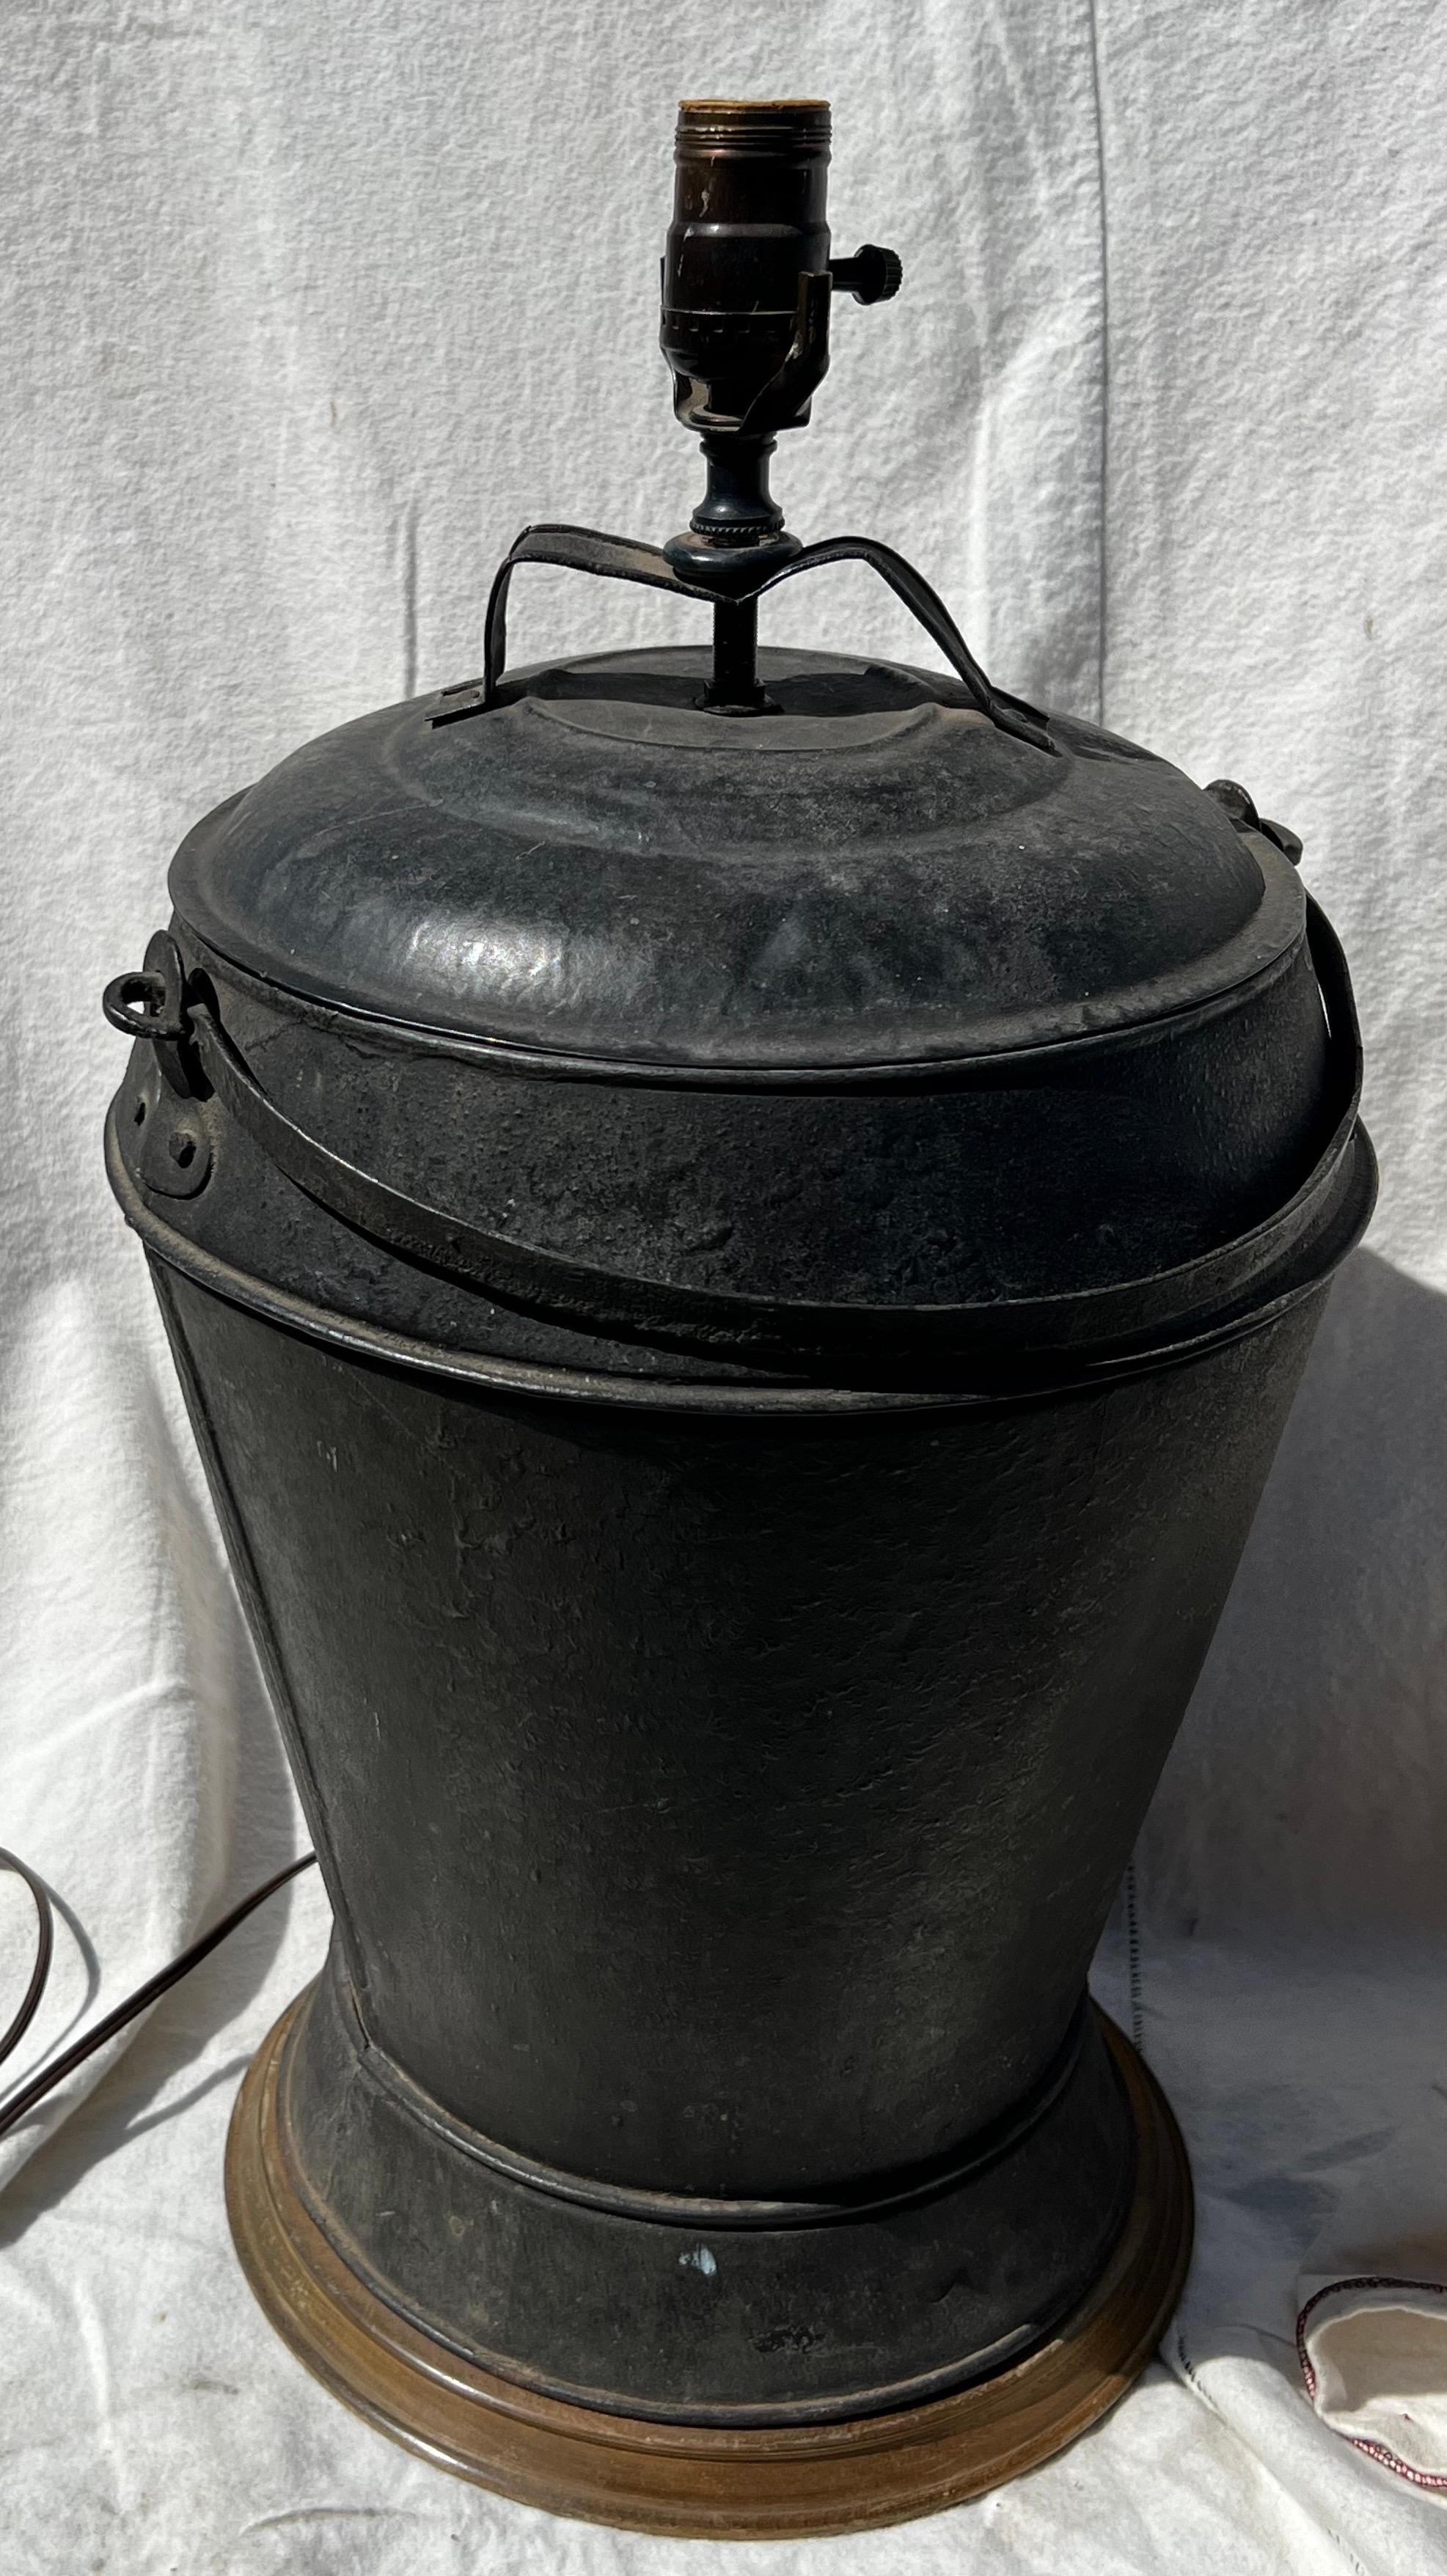 19th century tin bucket with swing handle, in black paint, converted to lamp, with wooden base. Old dent to top and slight bend in socket mount.